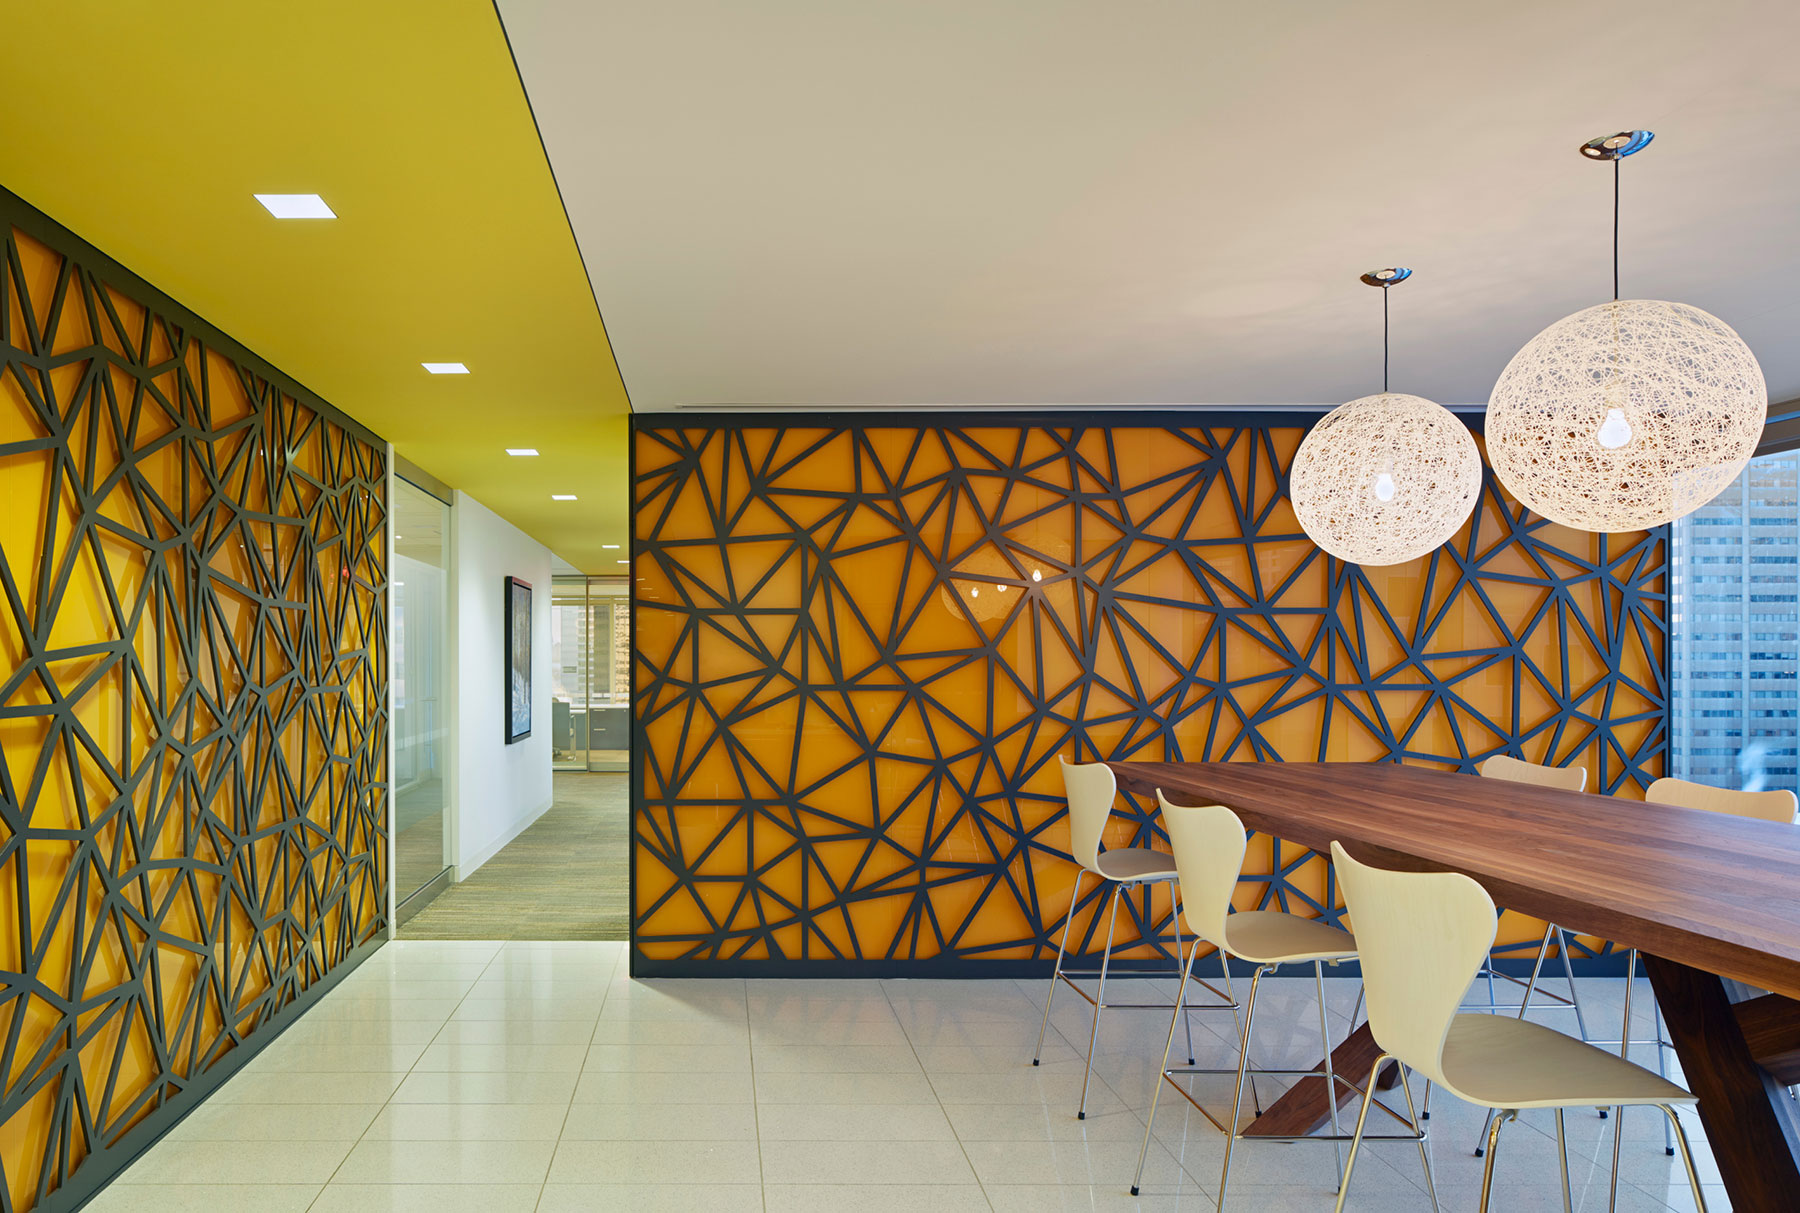 Modern & Elegant Feature Walls – The 3D Wall Panel Company